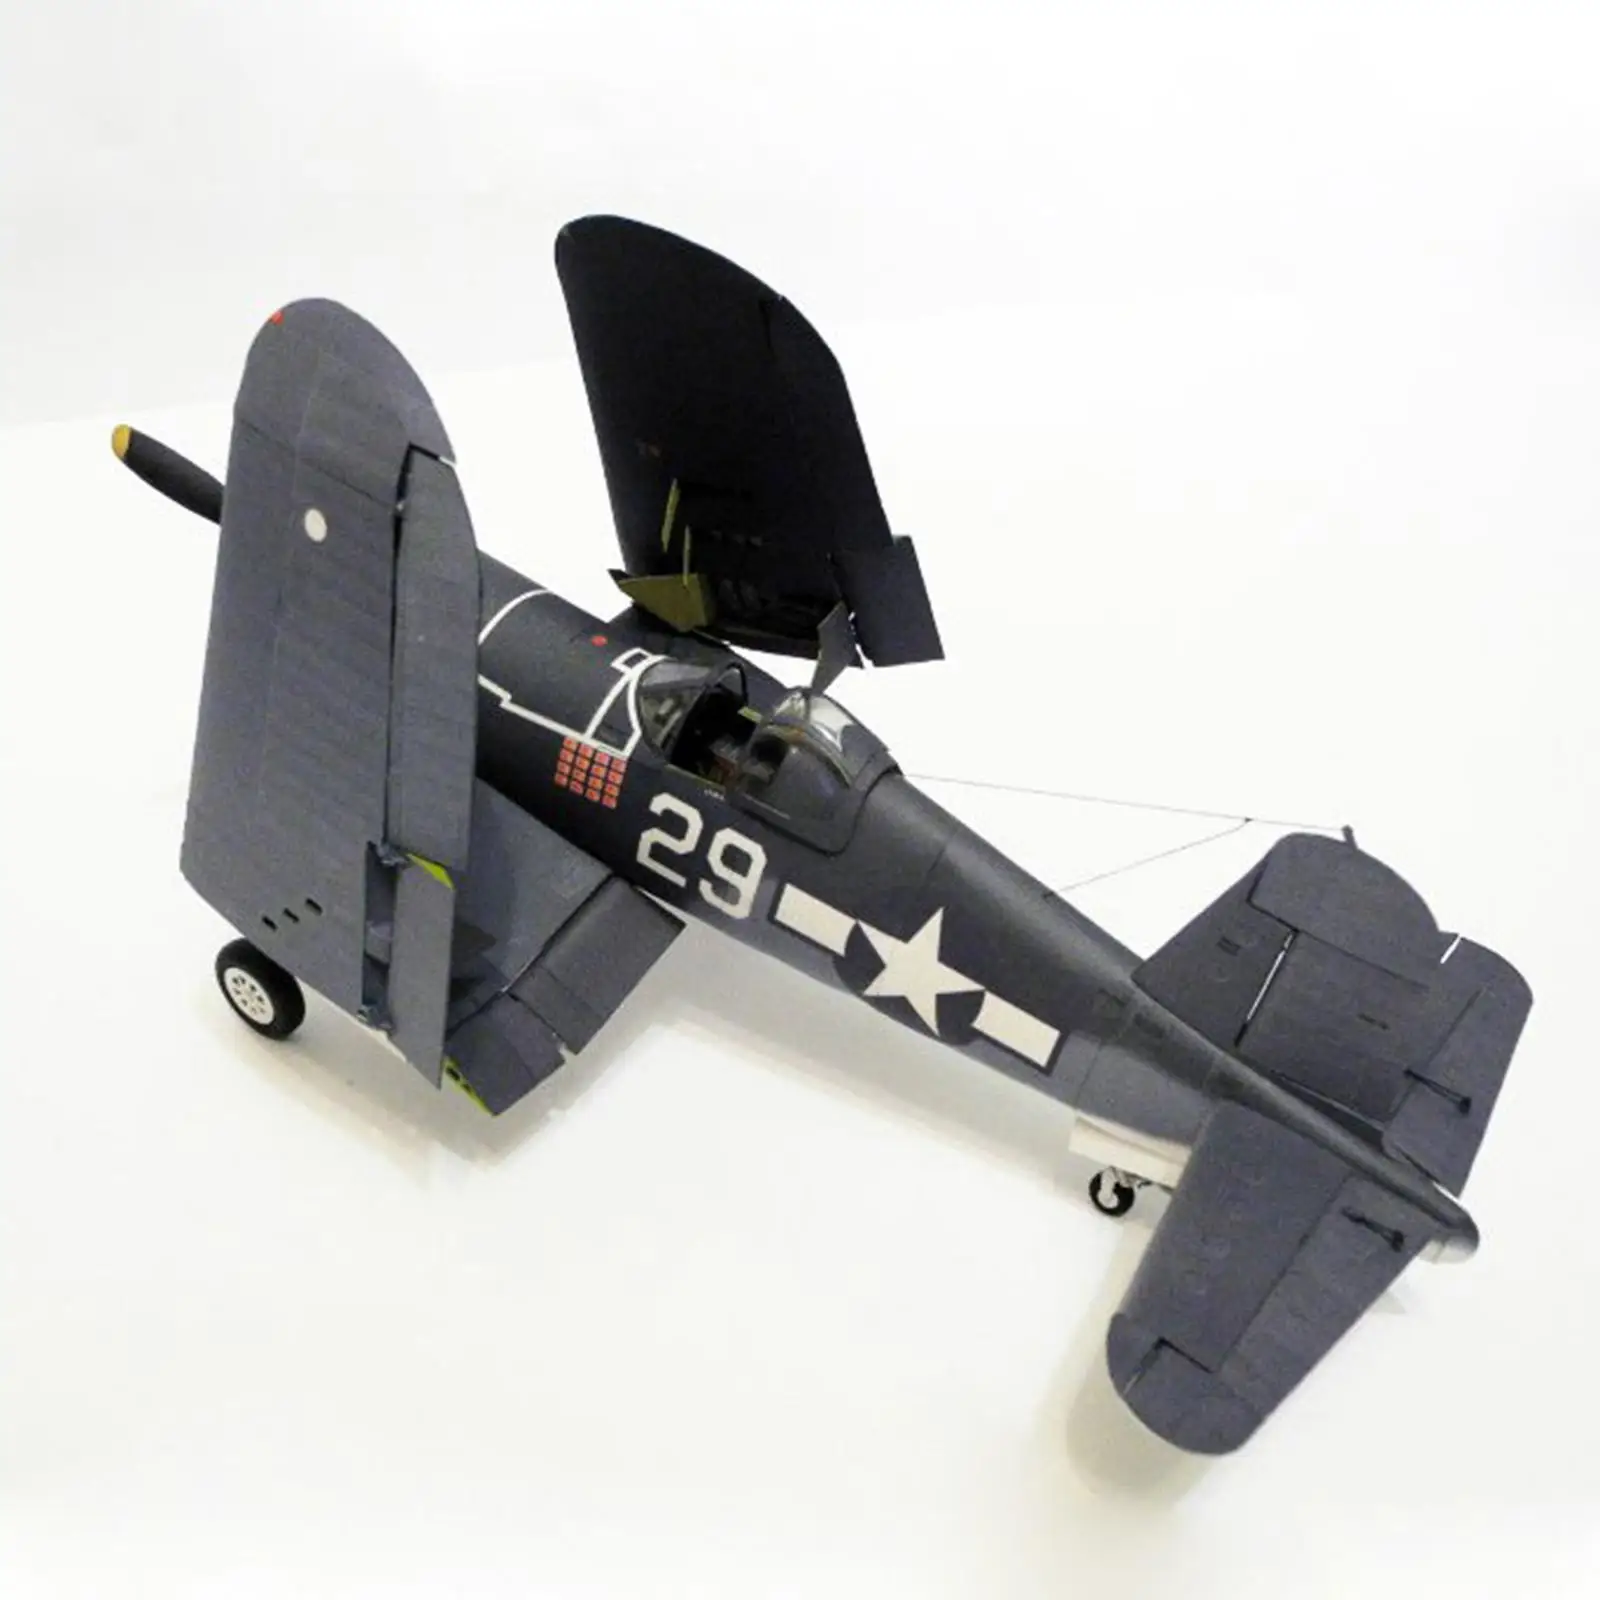 1:33 Scale Fighter Model Building Kits for Children Adults Boys